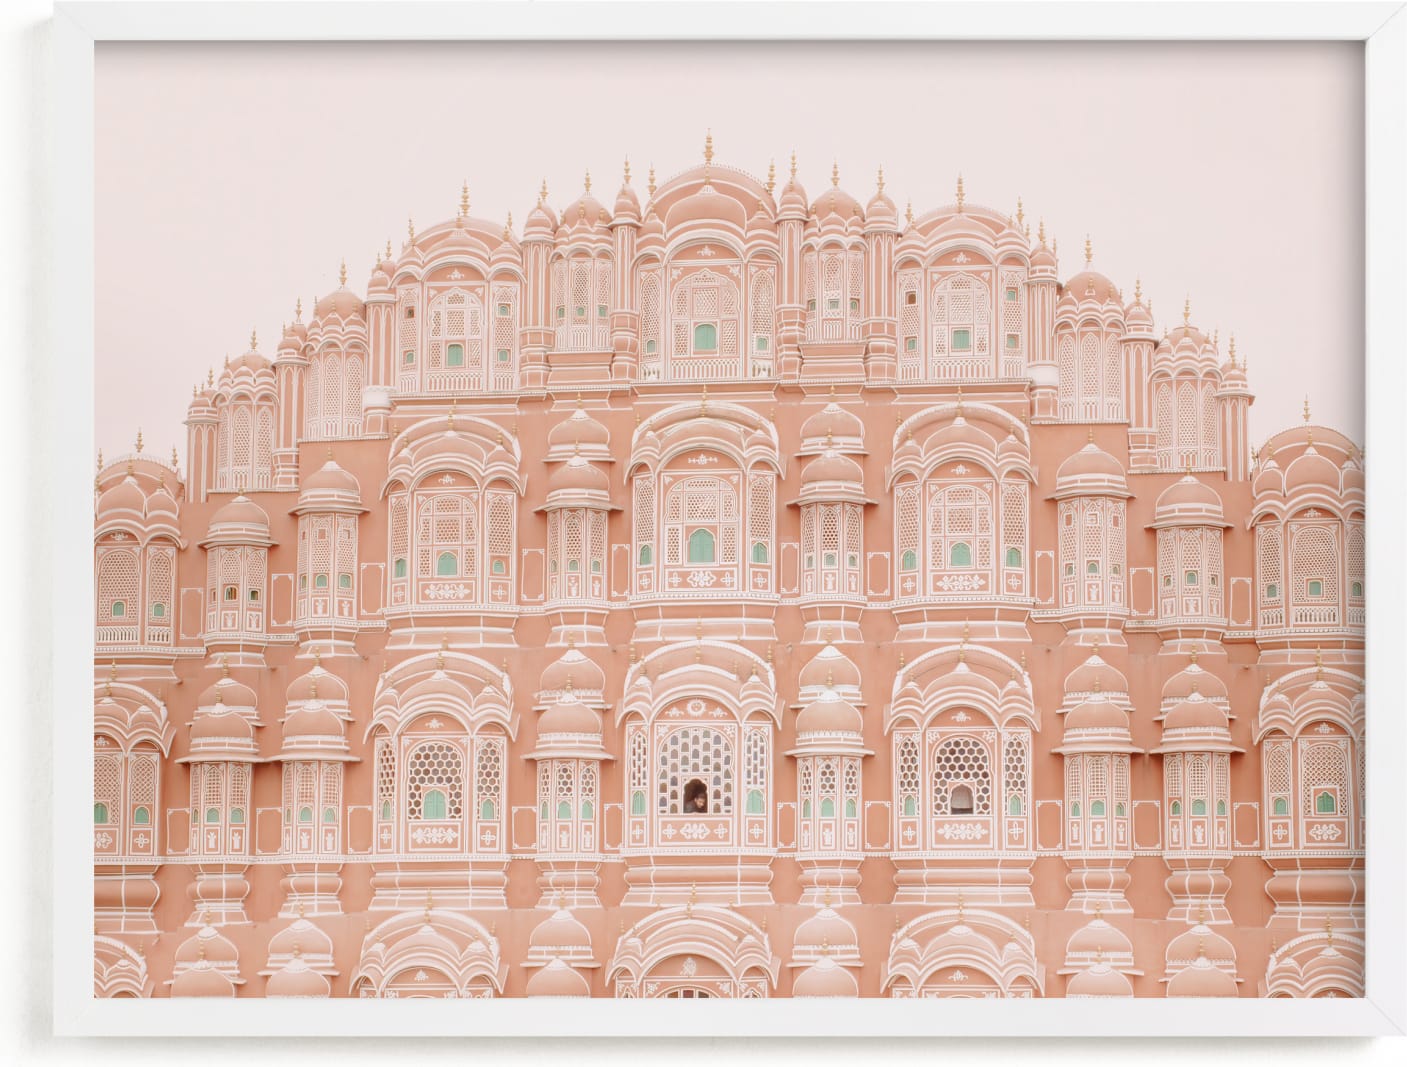 This is a pink art by Creo Study called Palatial.